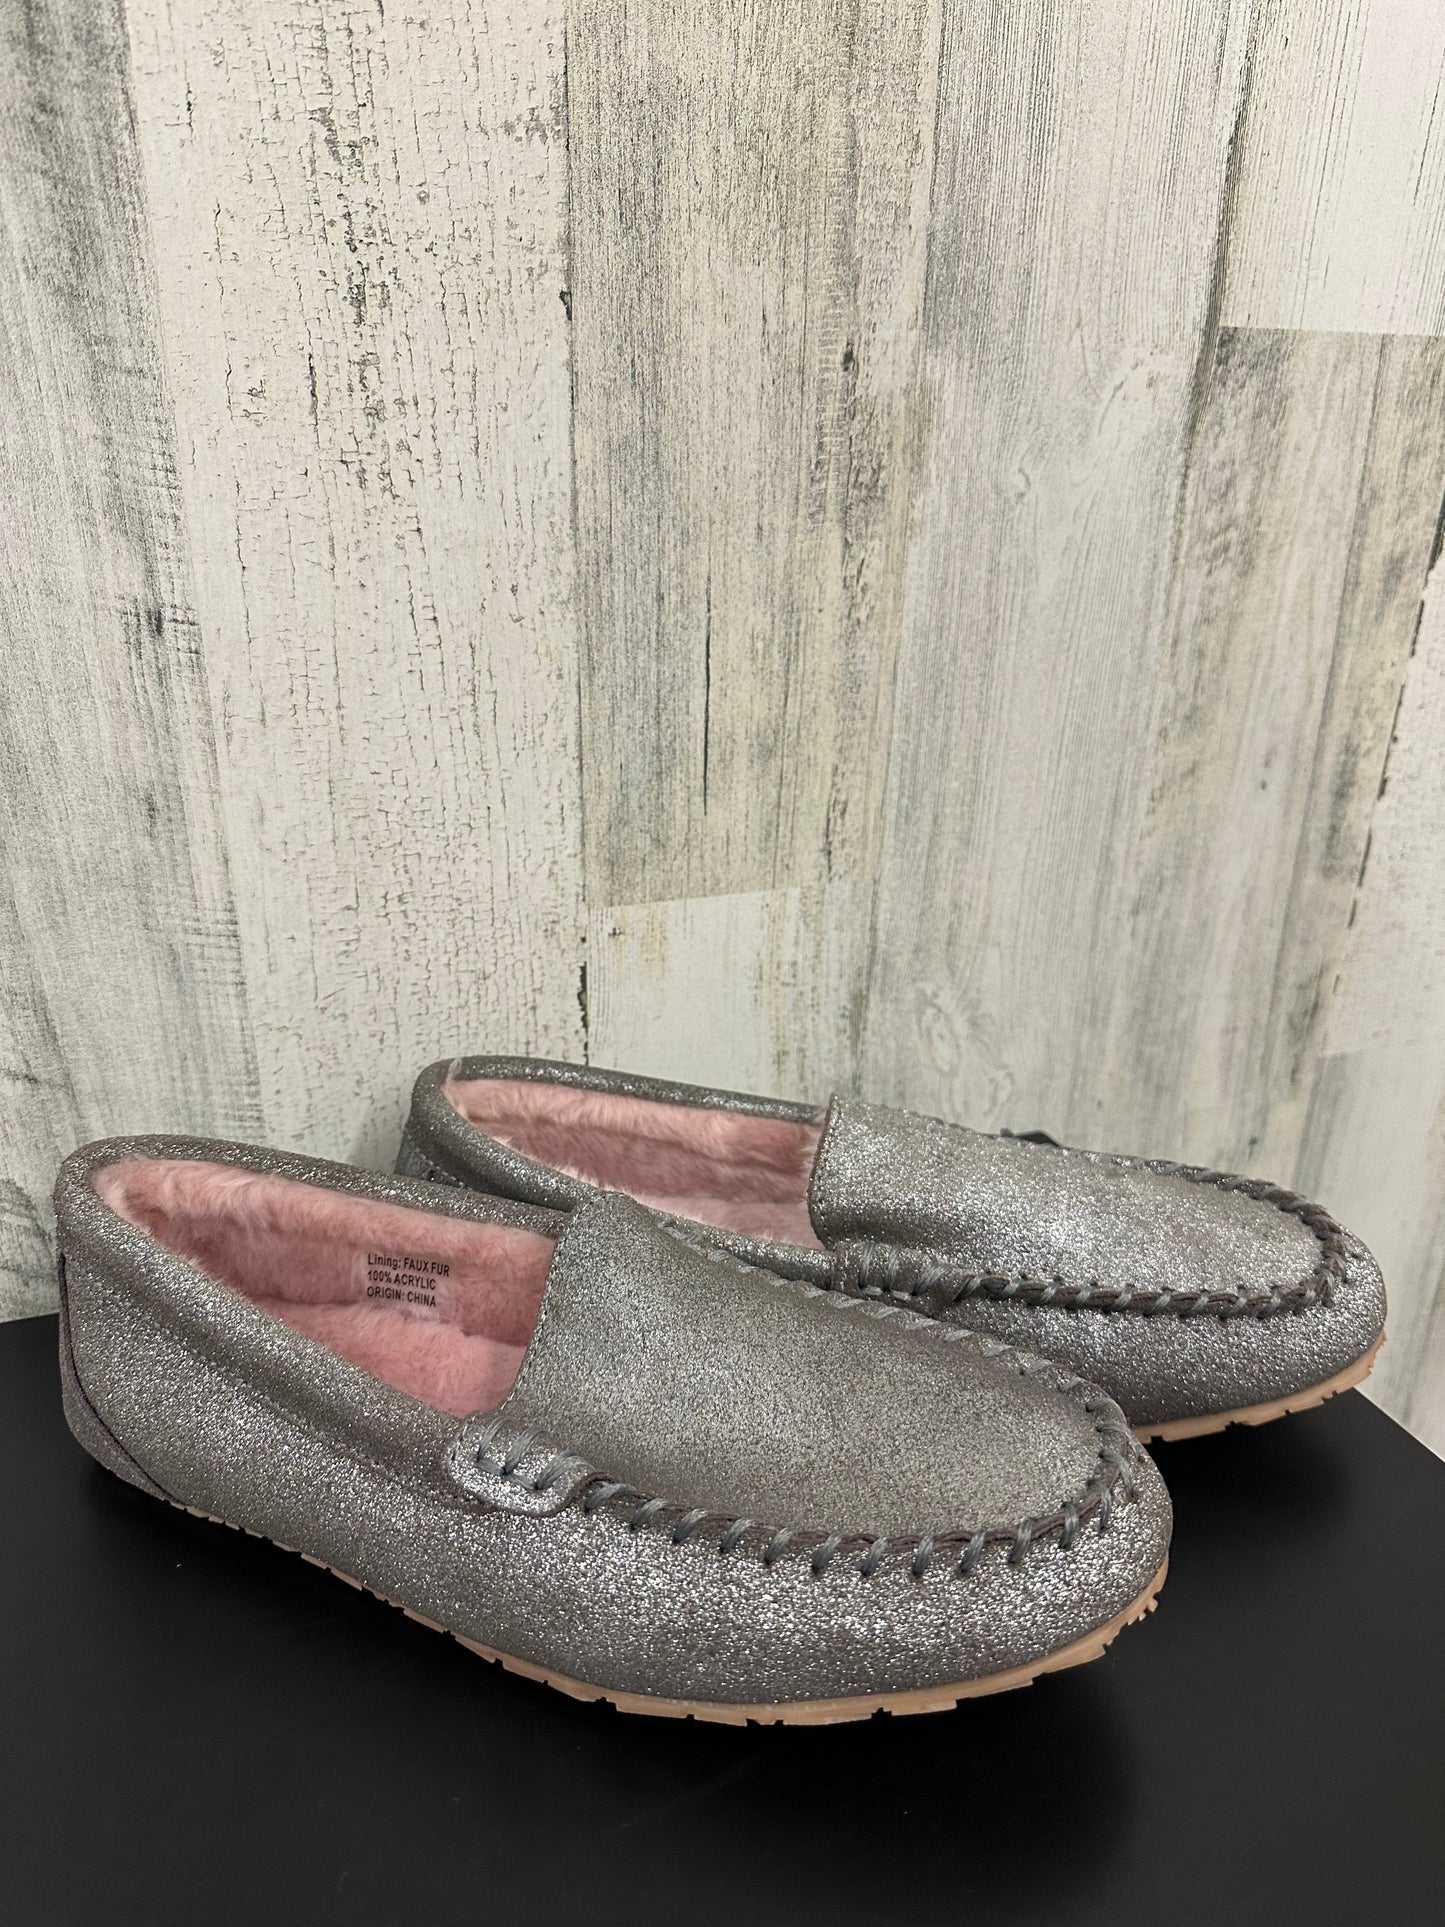 Shoes Flats Mule & Slide By Clarks  Size: 11